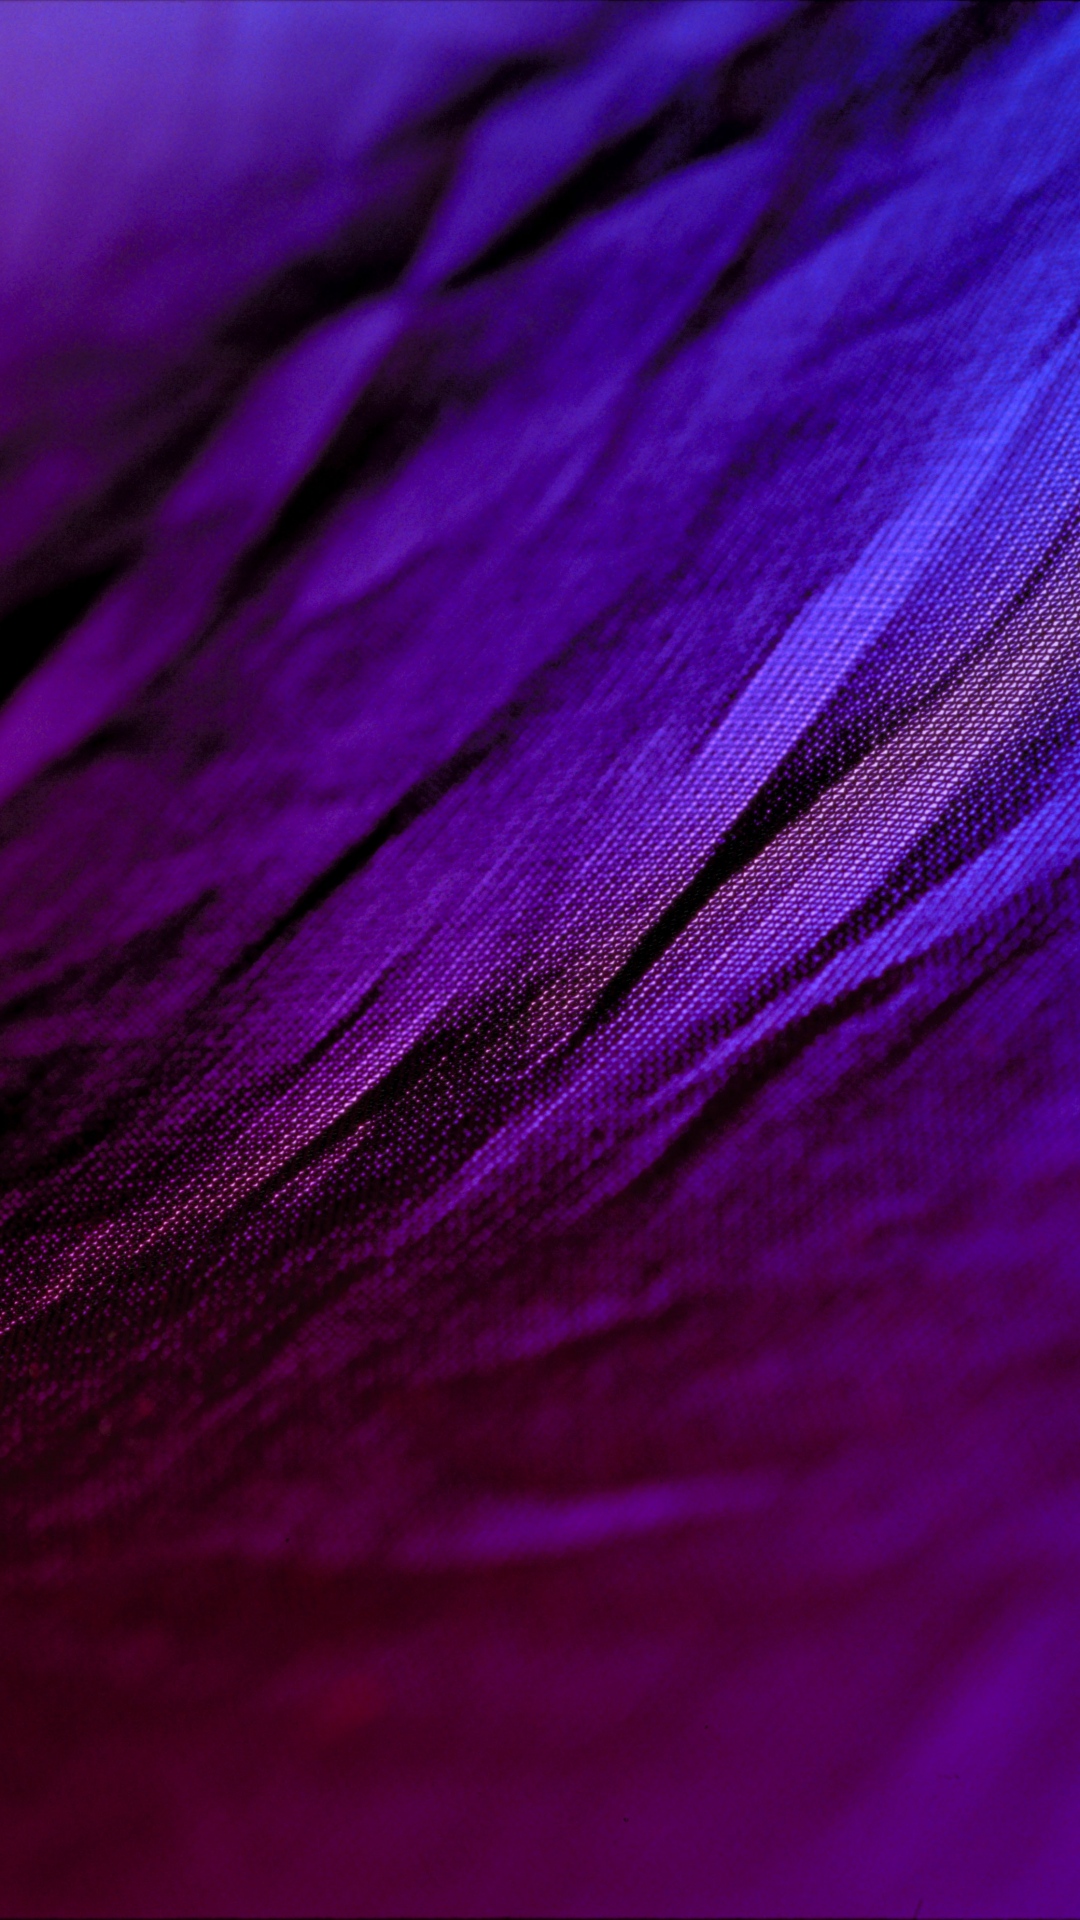 Purple Fabric Makes For A Stylish Iphone X Wallpaper Iphone Wallpapers